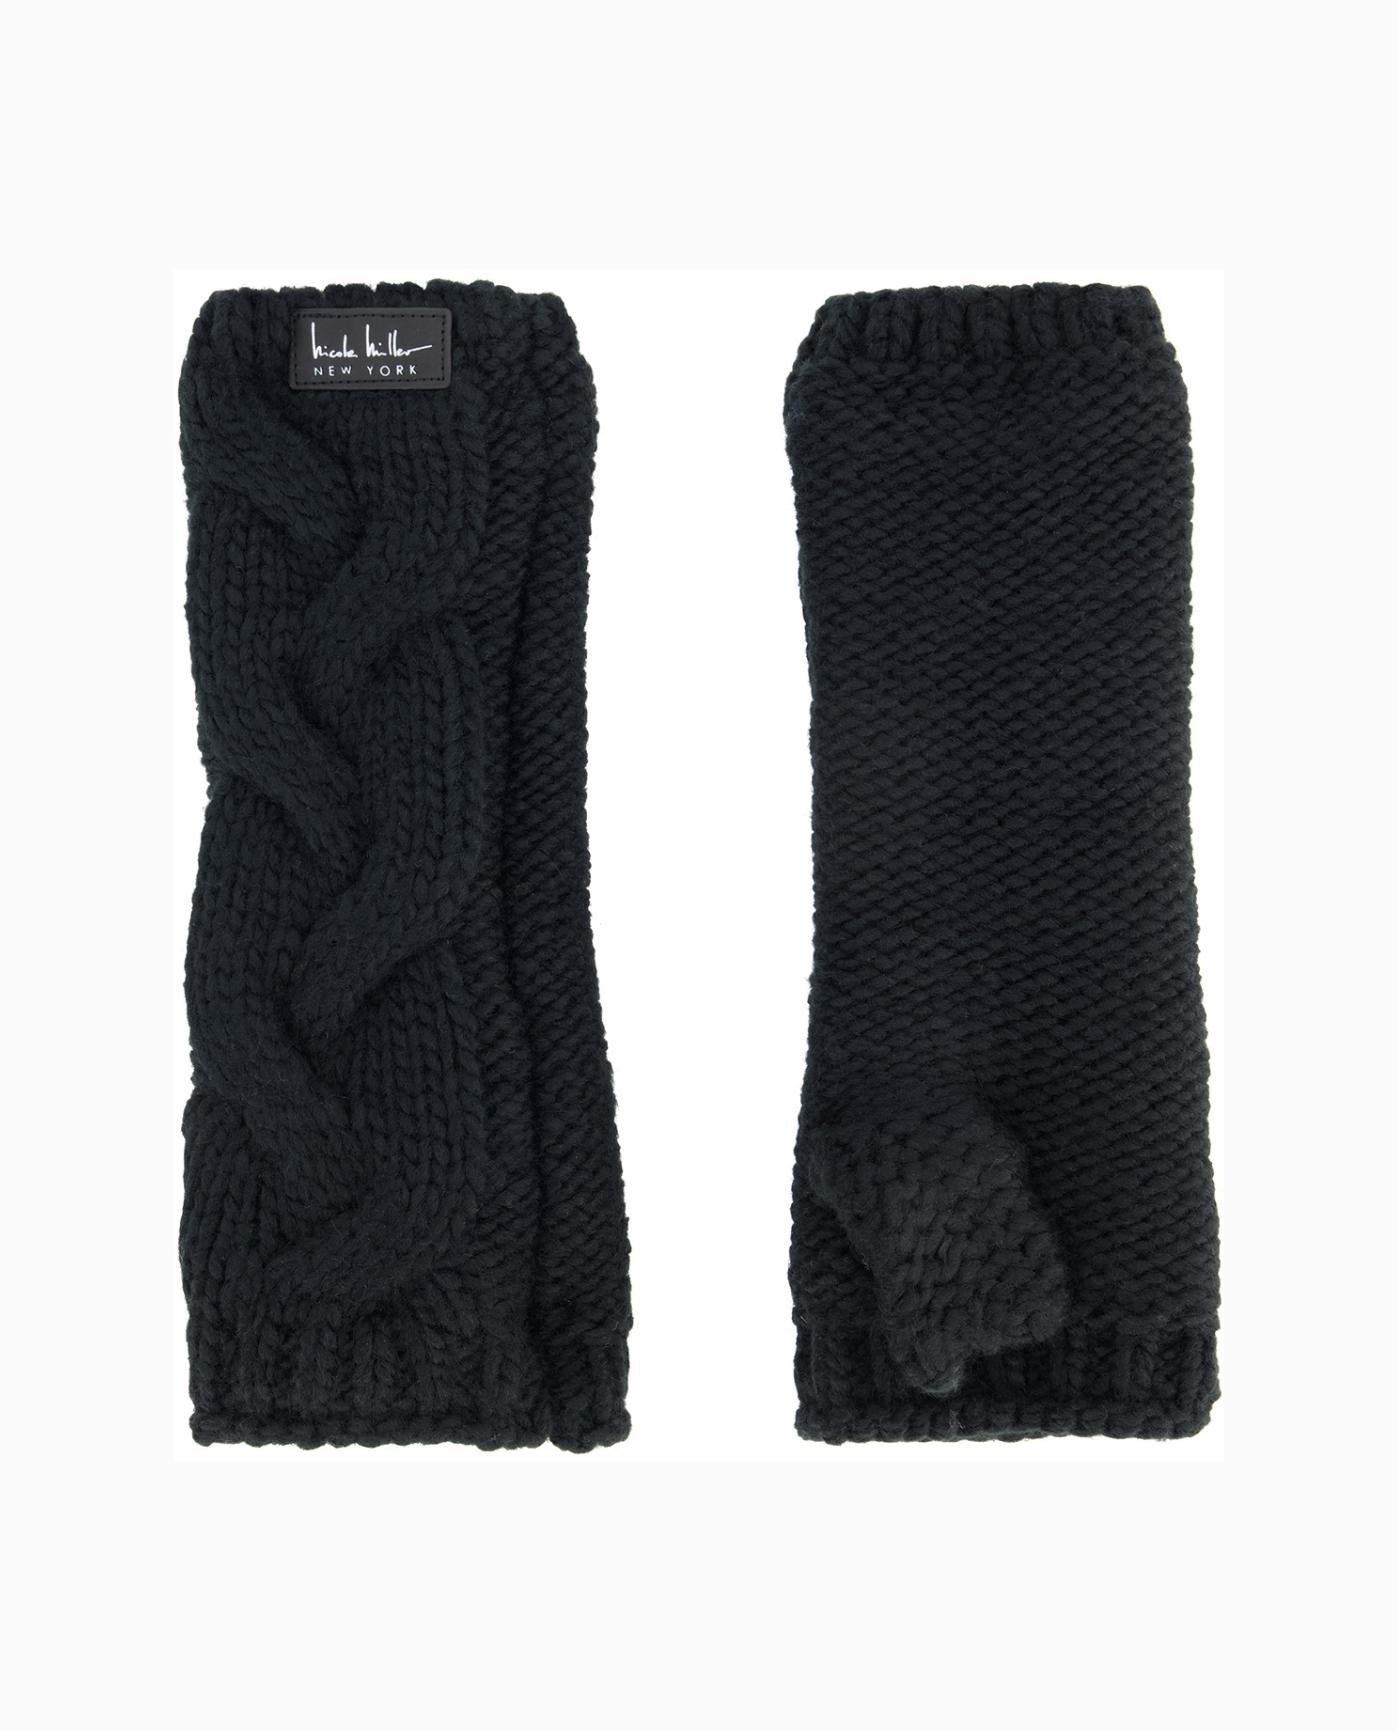 TOP AND BOTTOM OF CABLE KNIT ARM WARMER | Black